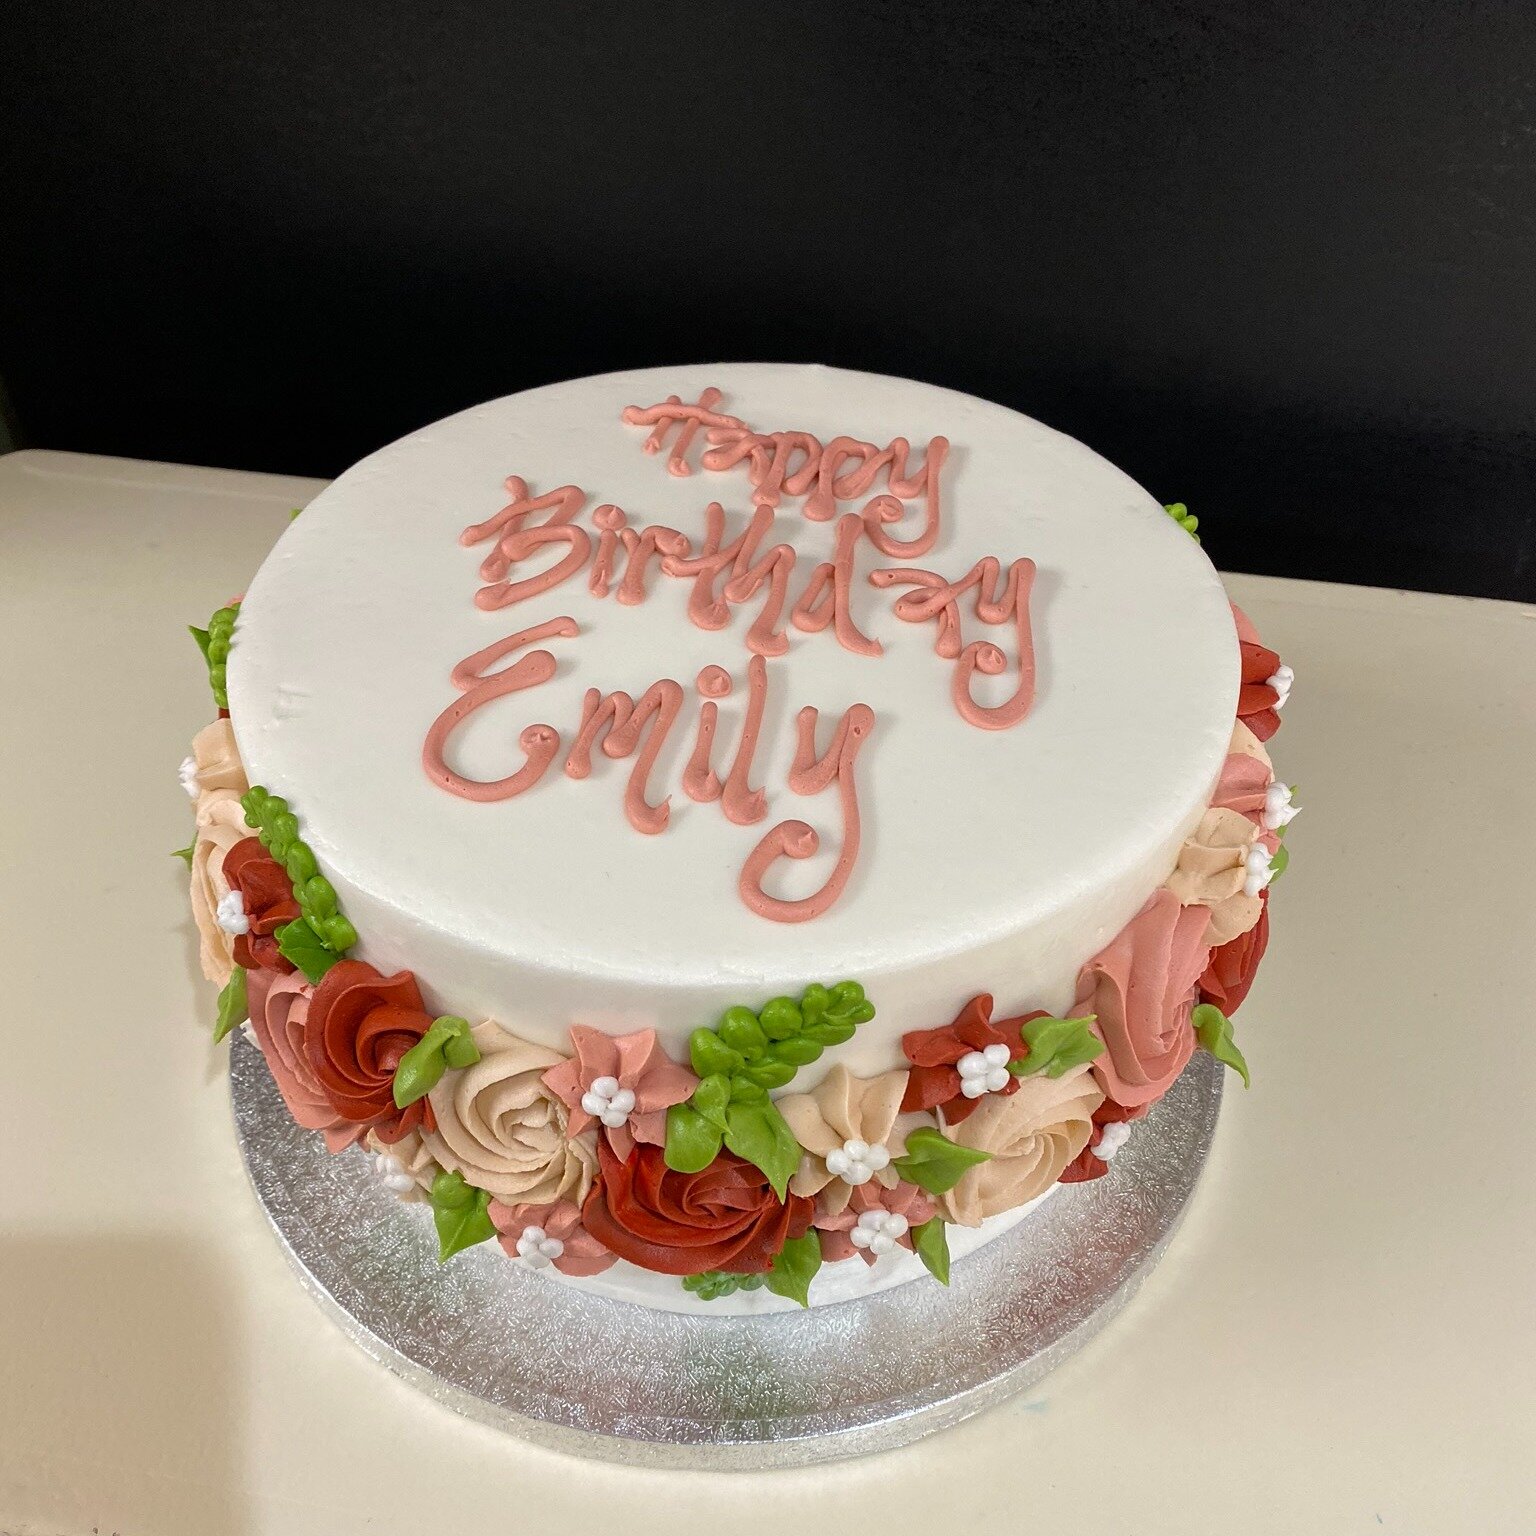 For our Friends who have pre-ordered custom cakes for this week, we are going to do our best to make it happen, but we won't have confirmation until later today or possibly tomorrow morning.  If, for some reason, we cannot fulfill your order, we will